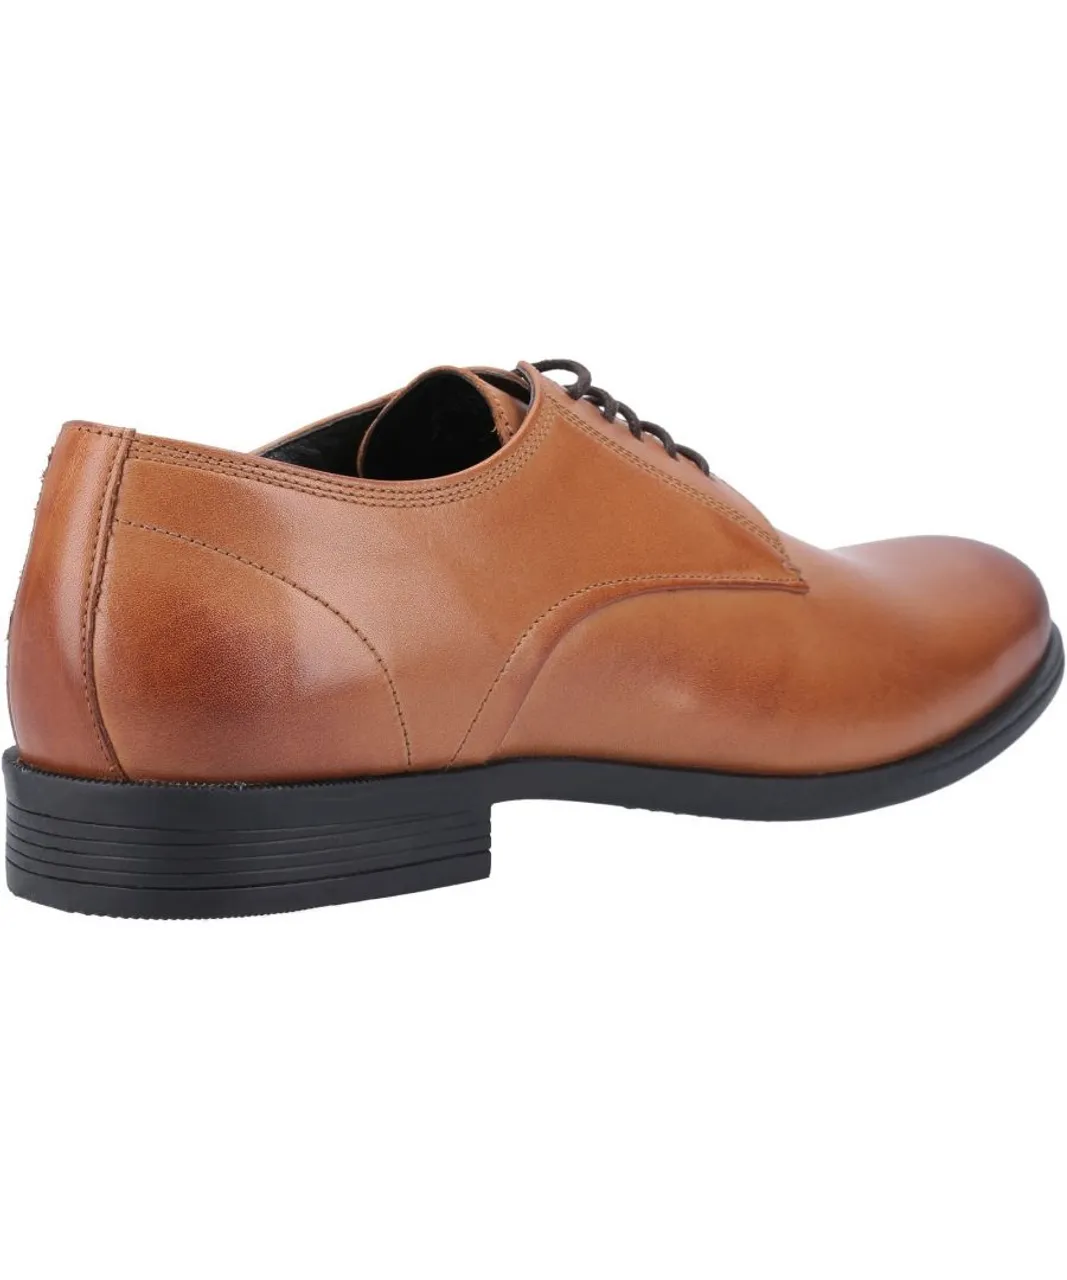 Hush Puppies Mens Oscar Clean Toe Lace Up Shoe - Tan Leather